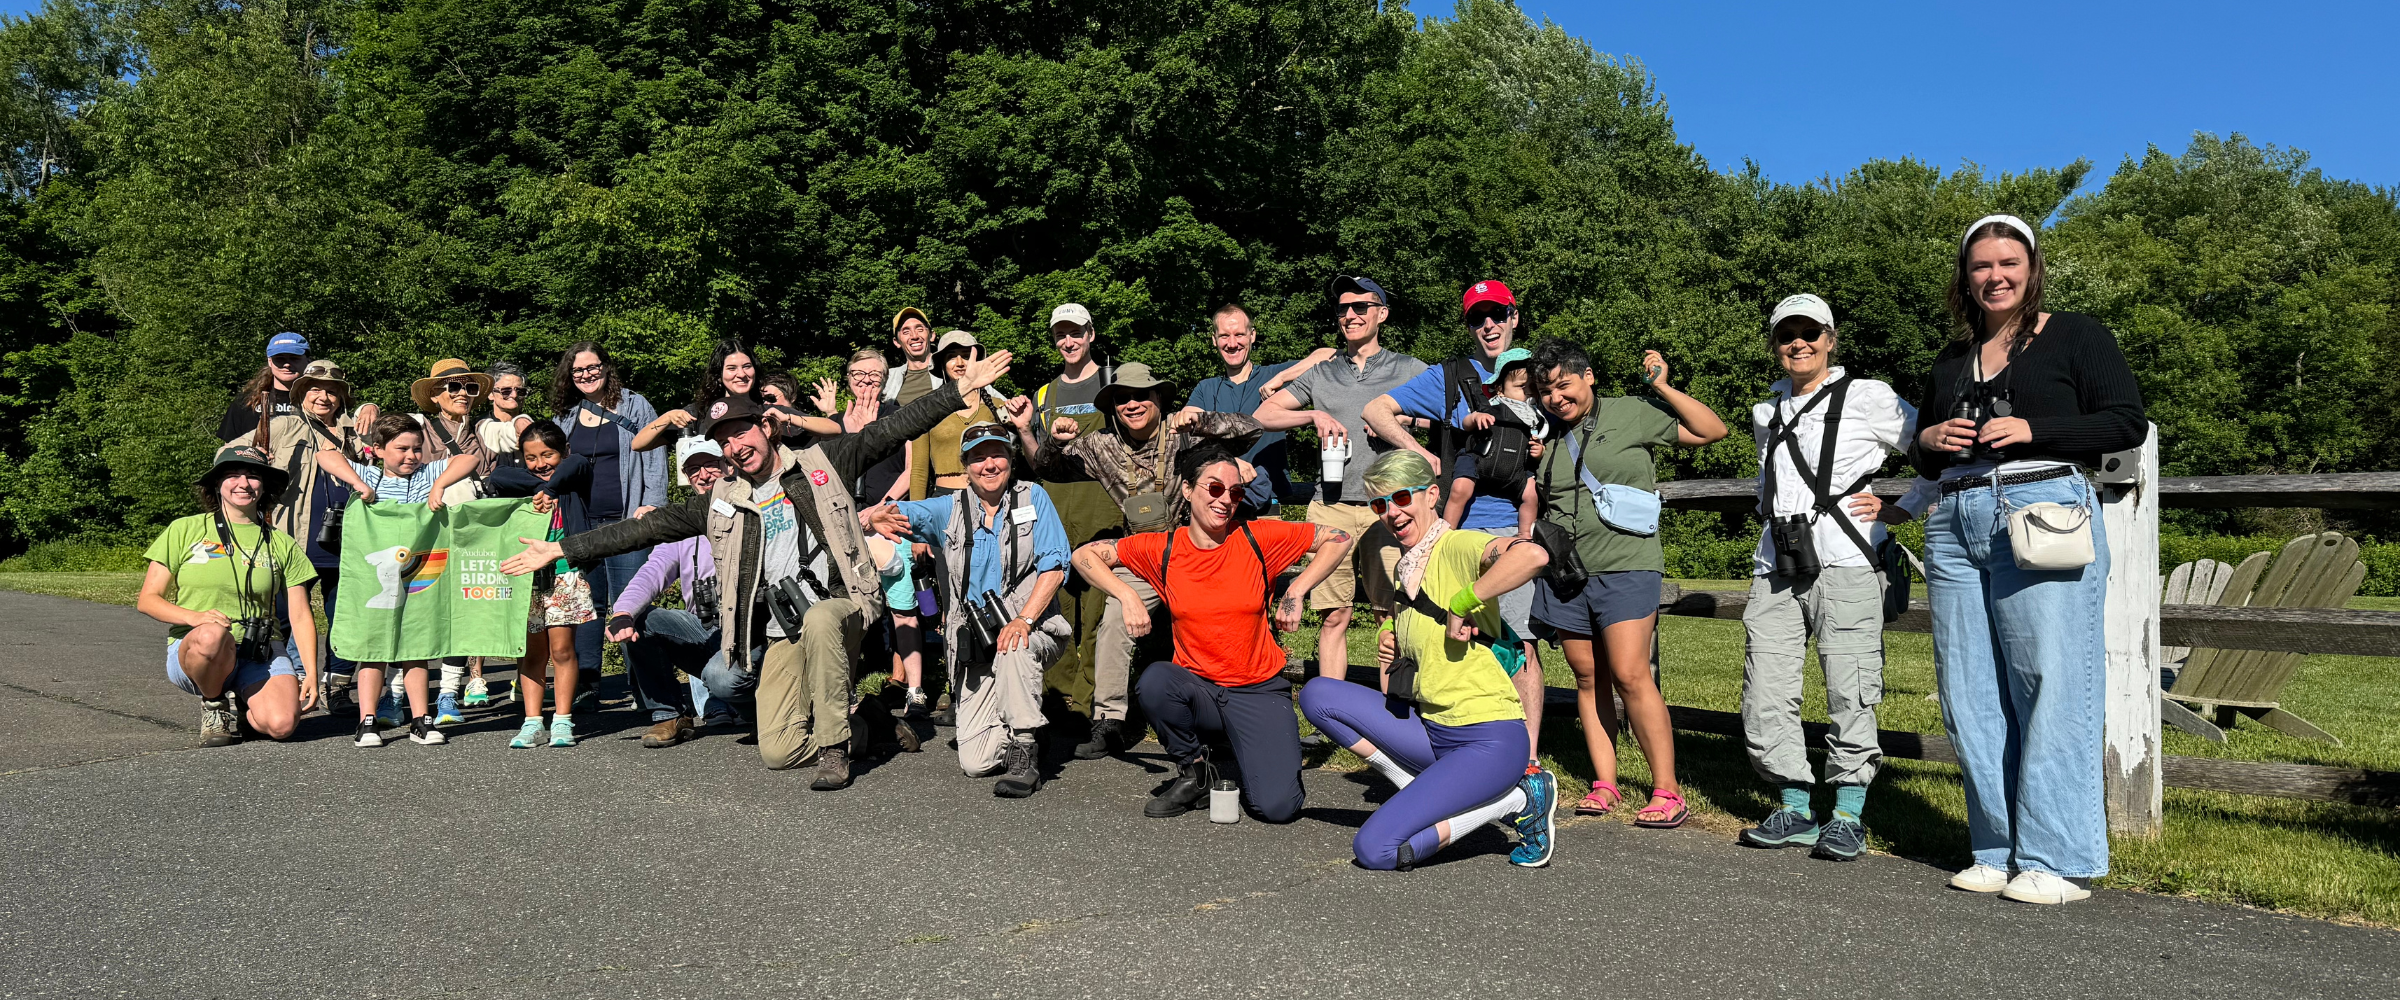 A large group of people with binoculars on a path at the Greenwich Audubon Center, posing for a photo and smiling. One person is holding up a Let's Go Birding Together banner.